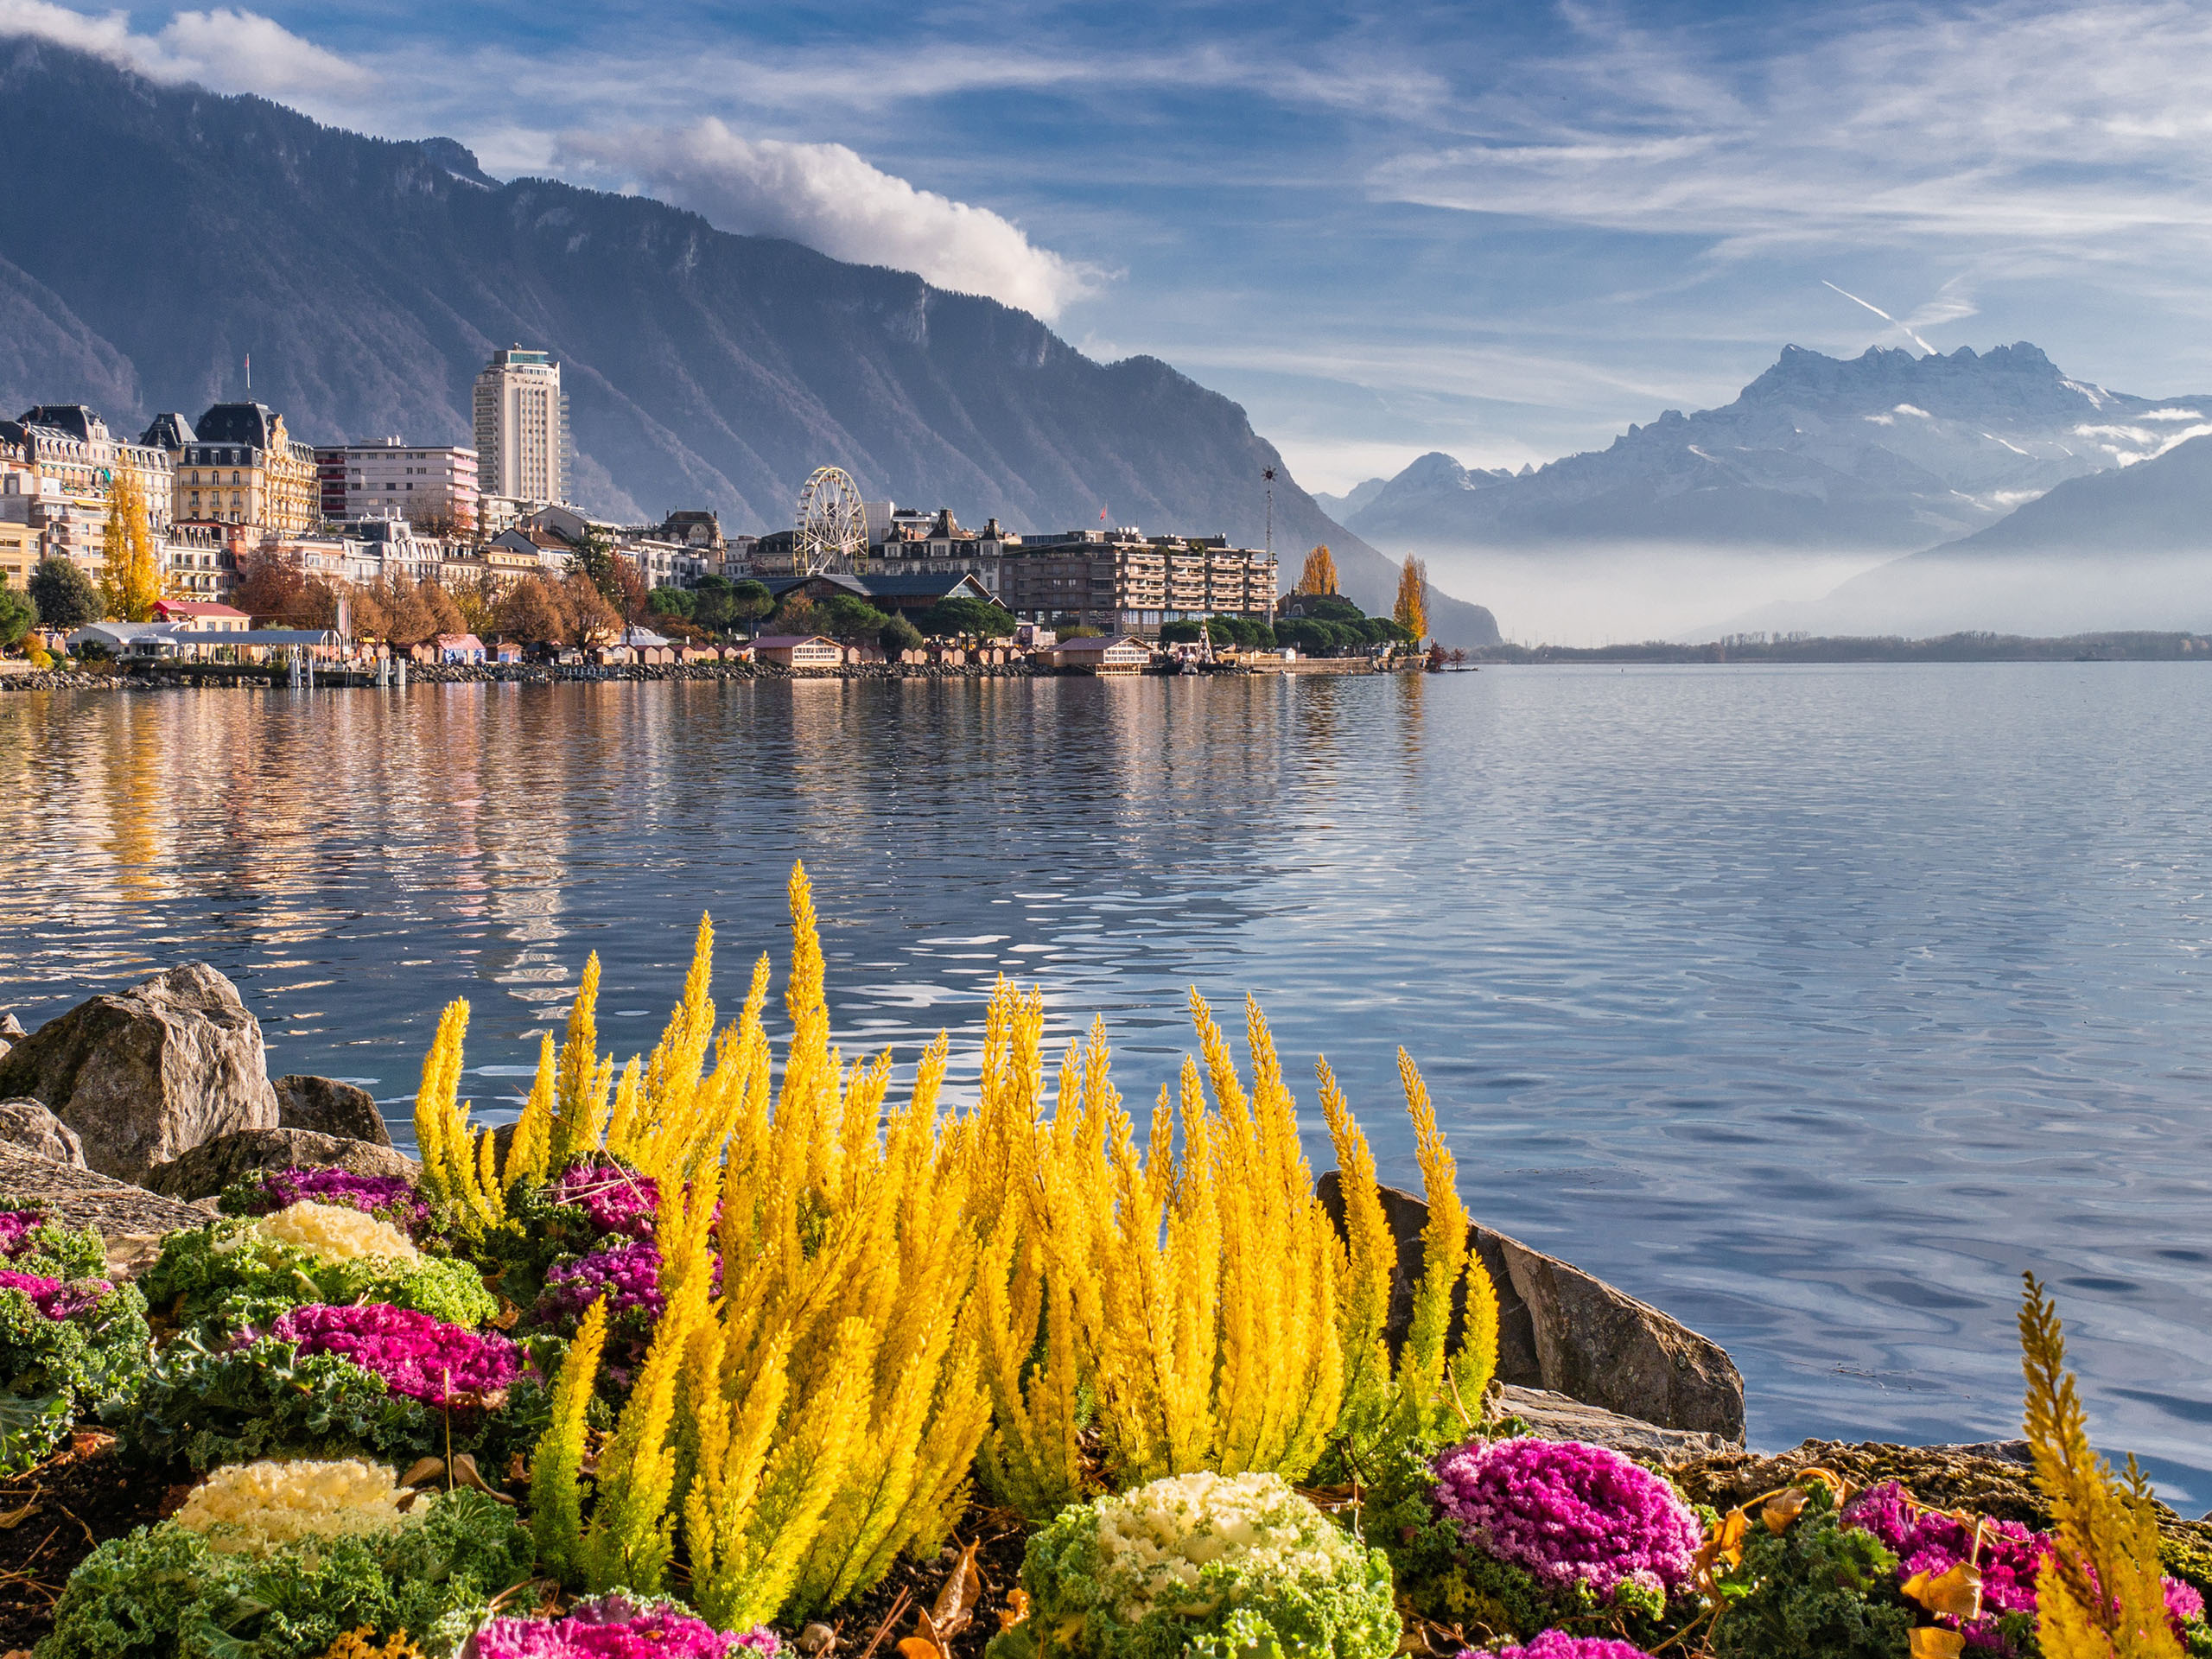 Montreux - a glamorous resort town